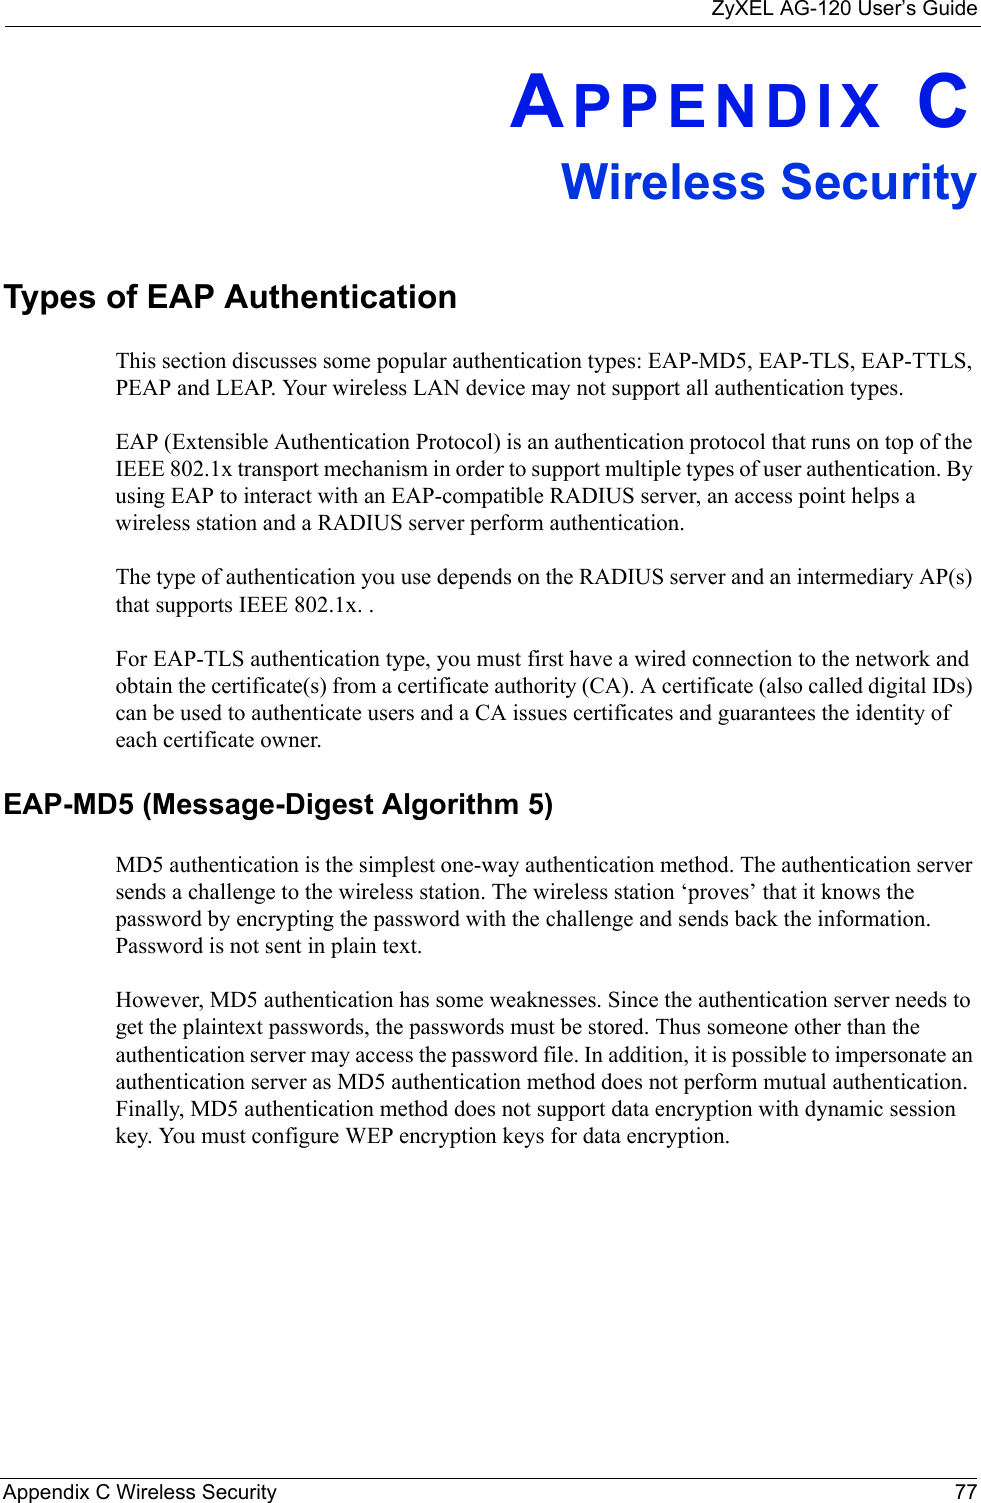 ZyXEL AG-120 User’s GuideAppendix C Wireless Security 77APPENDIX CWireless SecurityTypes of EAP AuthenticationThis section discusses some popular authentication types: EAP-MD5, EAP-TLS, EAP-TTLS, PEAP and LEAP. Your wireless LAN device may not support all authentication types. EAP (Extensible Authentication Protocol) is an authentication protocol that runs on top of the IEEE 802.1x transport mechanism in order to support multiple types of user authentication. By using EAP to interact with an EAP-compatible RADIUS server, an access point helps a wireless station and a RADIUS server perform authentication. The type of authentication you use depends on the RADIUS server and an intermediary AP(s) that supports IEEE 802.1x. .For EAP-TLS authentication type, you must first have a wired connection to the network and obtain the certificate(s) from a certificate authority (CA). A certificate (also called digital IDs) can be used to authenticate users and a CA issues certificates and guarantees the identity of each certificate owner.EAP-MD5 (Message-Digest Algorithm 5)MD5 authentication is the simplest one-way authentication method. The authentication server sends a challenge to the wireless station. The wireless station ‘proves’ that it knows the password by encrypting the password with the challenge and sends back the information. Password is not sent in plain text. However, MD5 authentication has some weaknesses. Since the authentication server needs to get the plaintext passwords, the passwords must be stored. Thus someone other than the authentication server may access the password file. In addition, it is possible to impersonate an authentication server as MD5 authentication method does not perform mutual authentication. Finally, MD5 authentication method does not support data encryption with dynamic session key. You must configure WEP encryption keys for data encryption. 